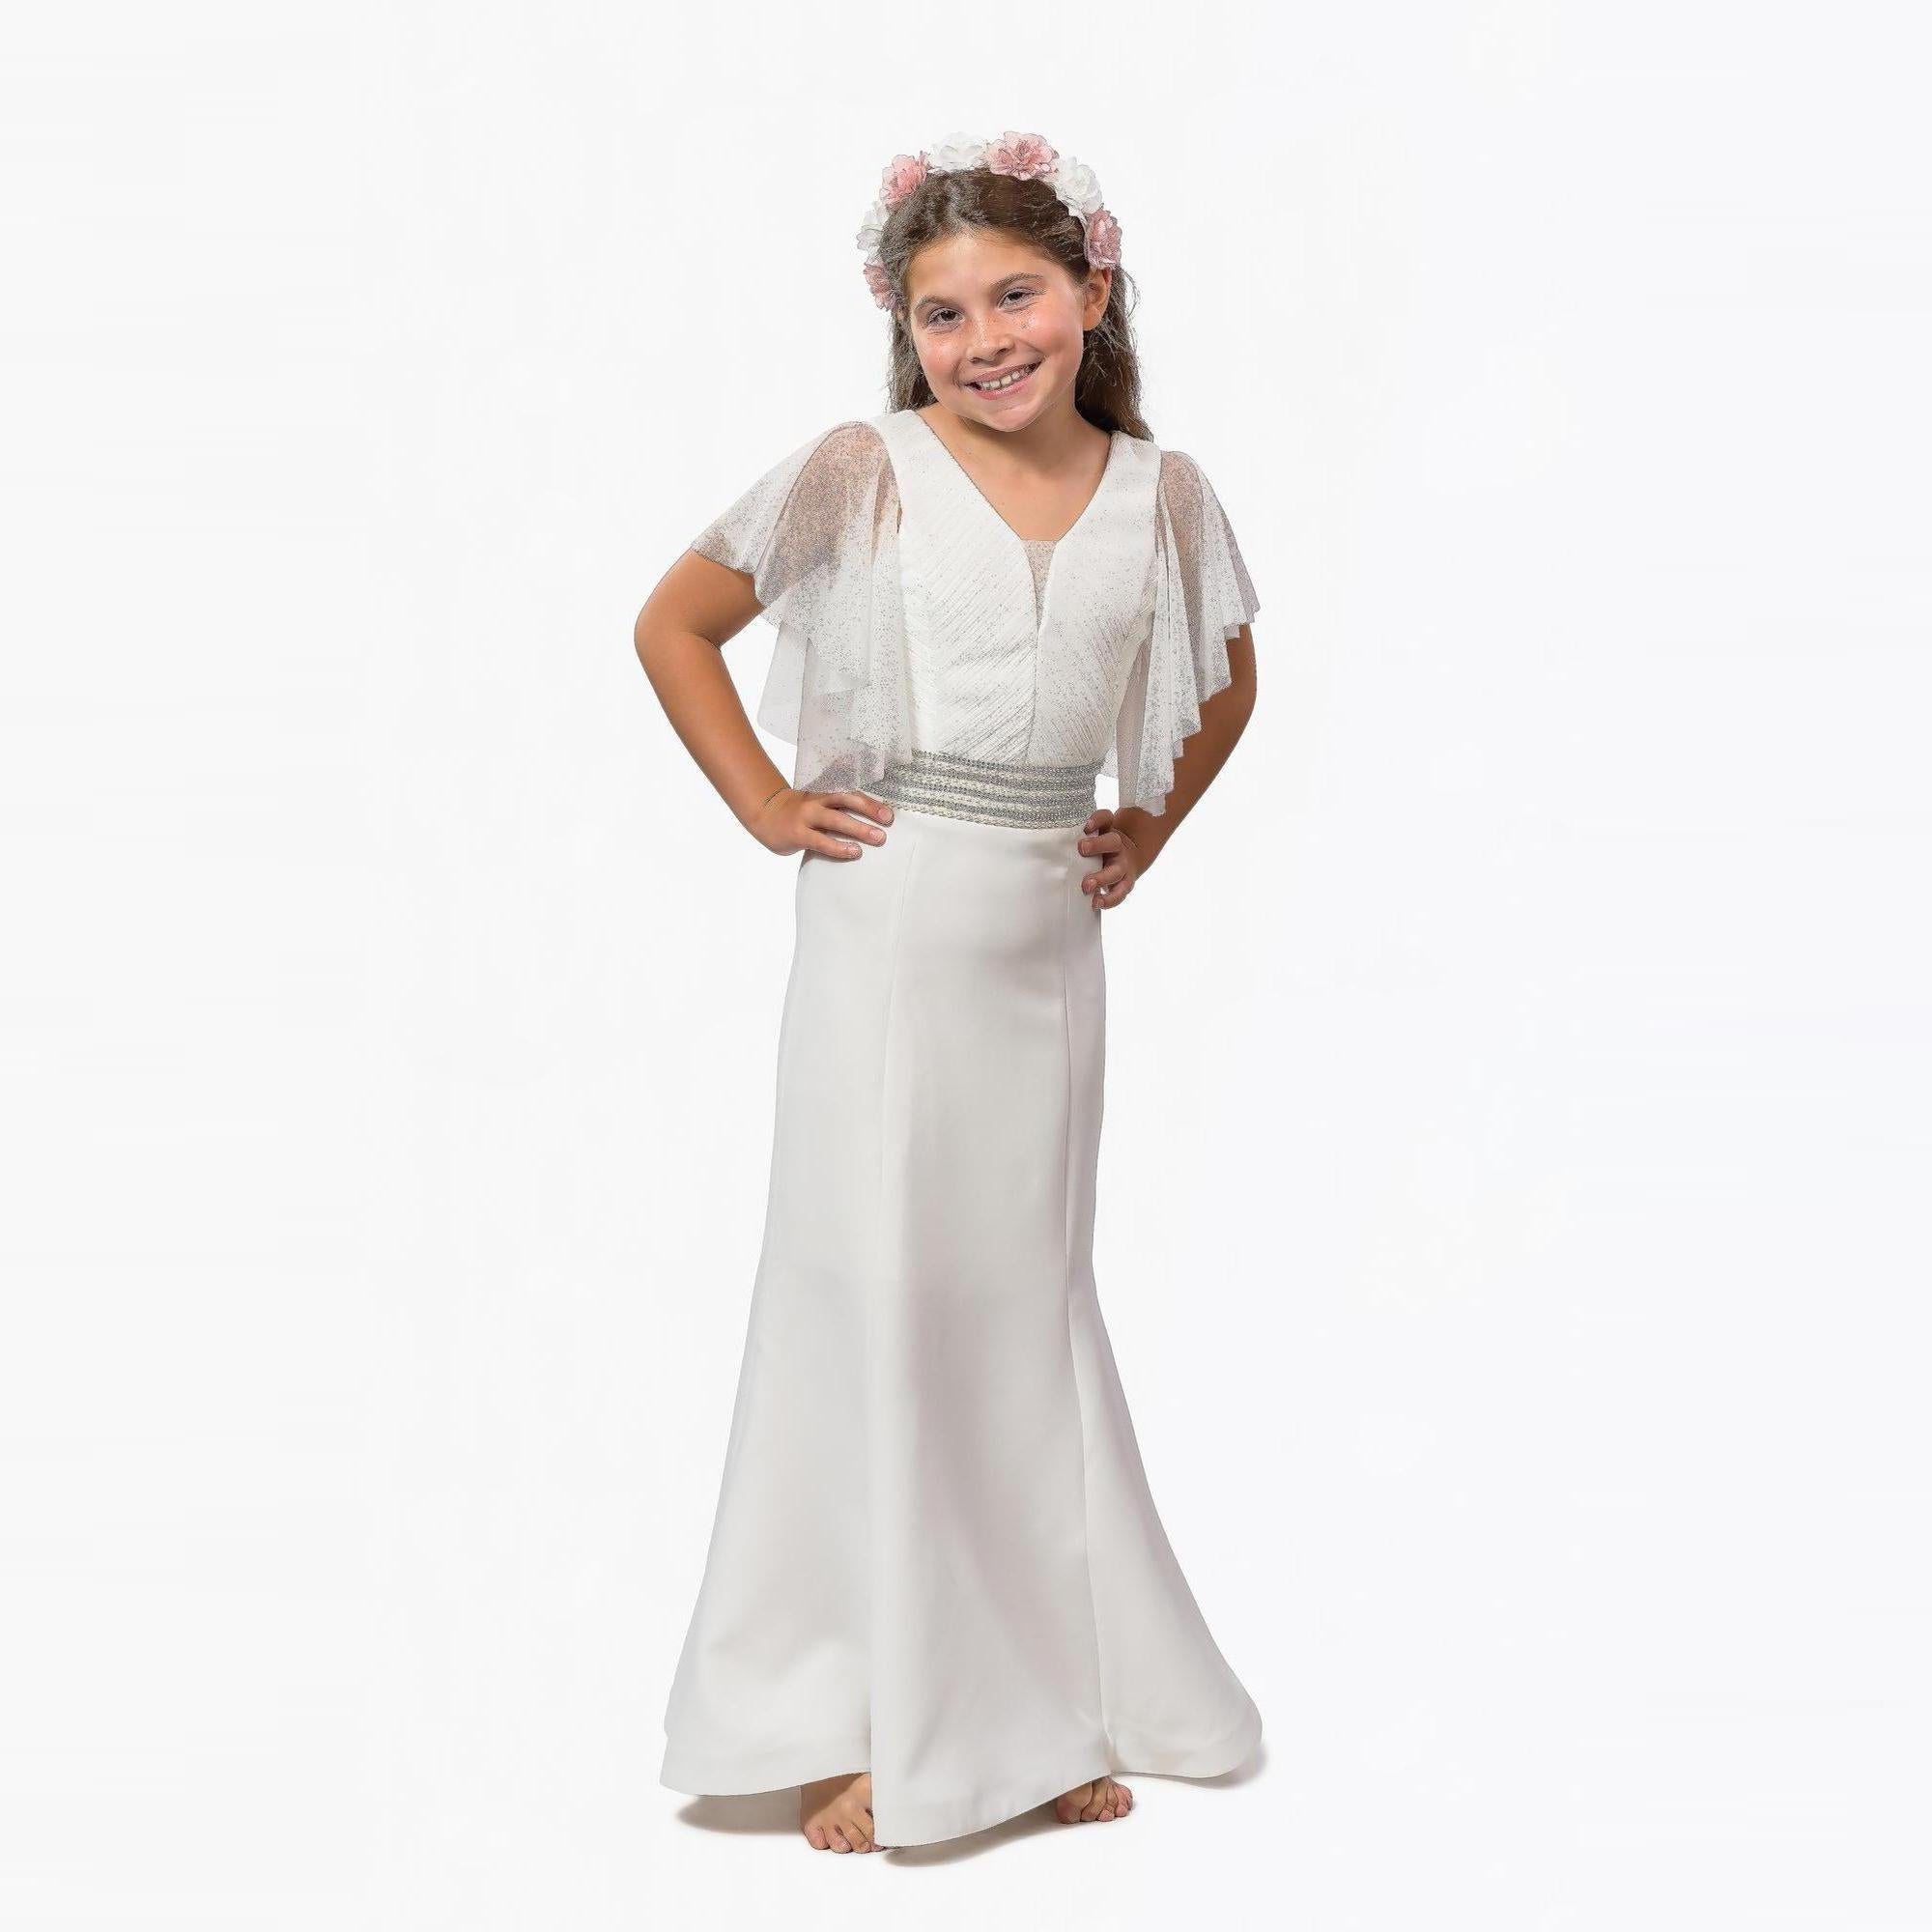 Tania's Gown Girls Formal Dress